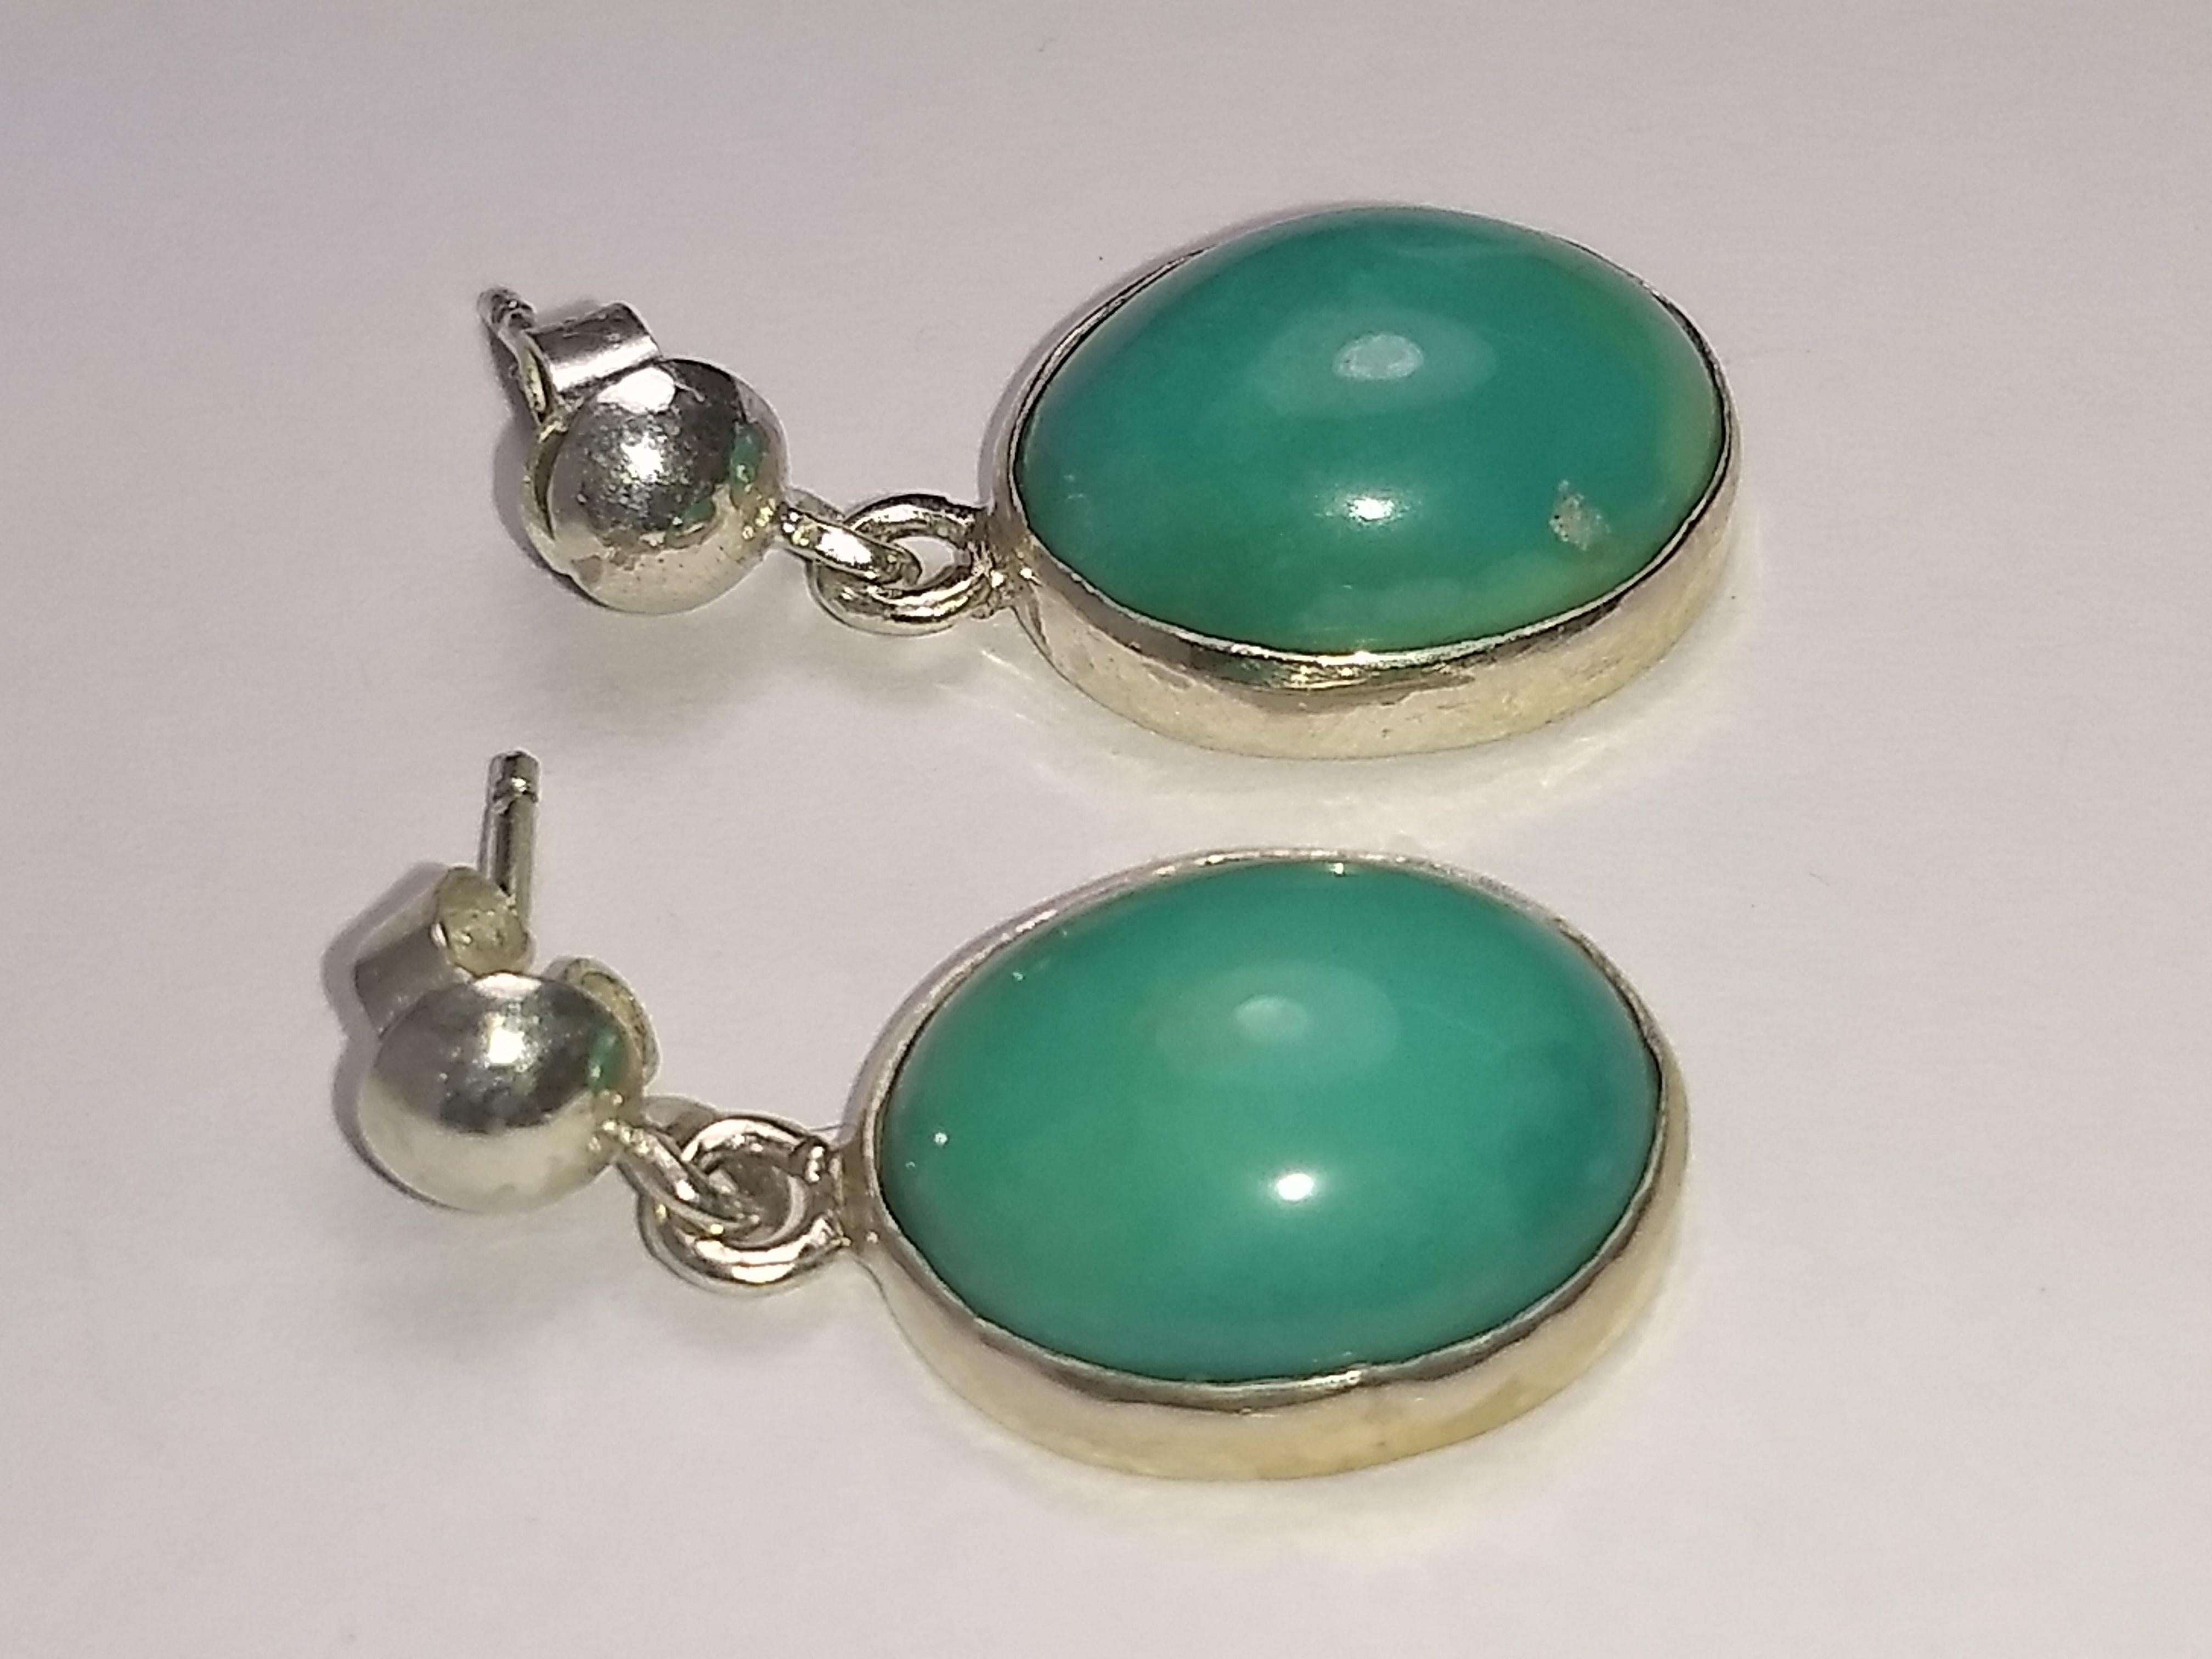 This Alberto Juan handmade one of a kind earrings were made from 18.5 carats of natural blue turquoise cabochons and sterling silver, unmarked. Earrings are 1